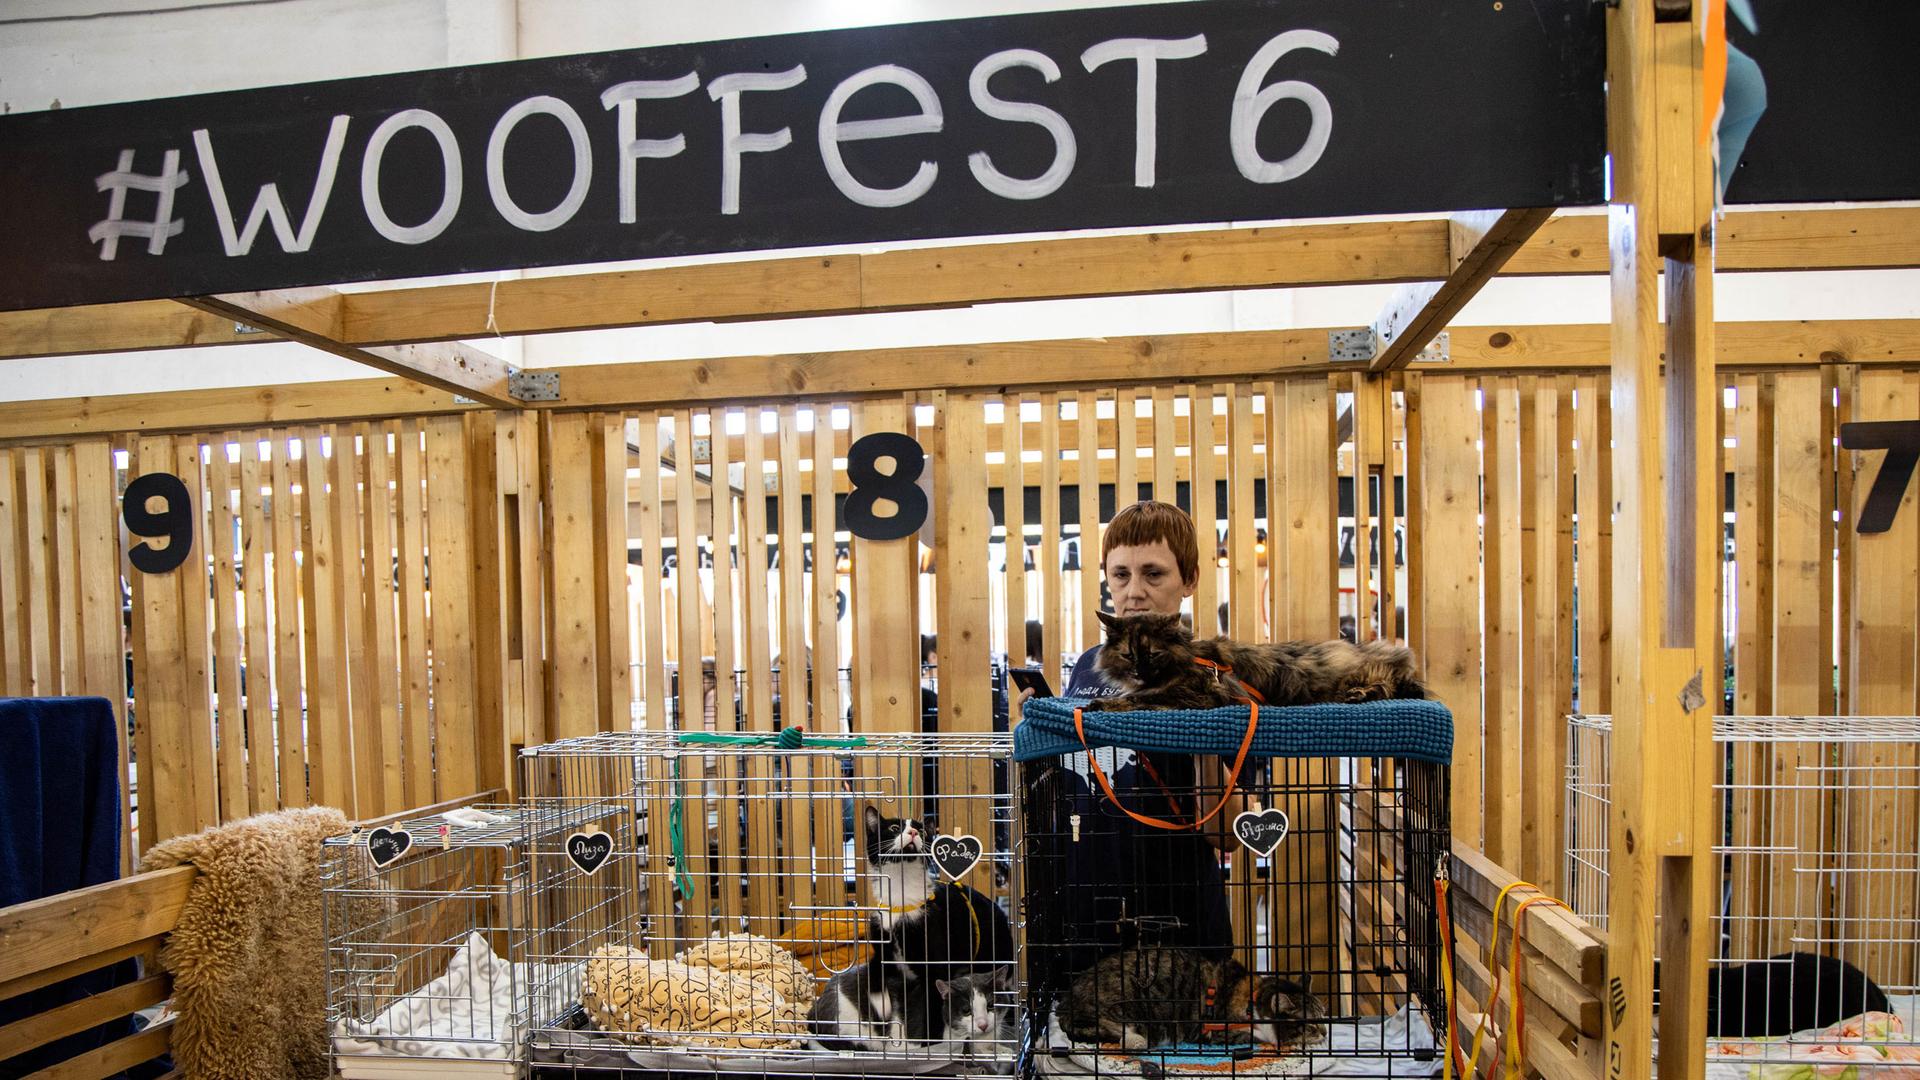 A woman is shown standing behind three cats in cages below a wooden sign that says, "Woof fest."